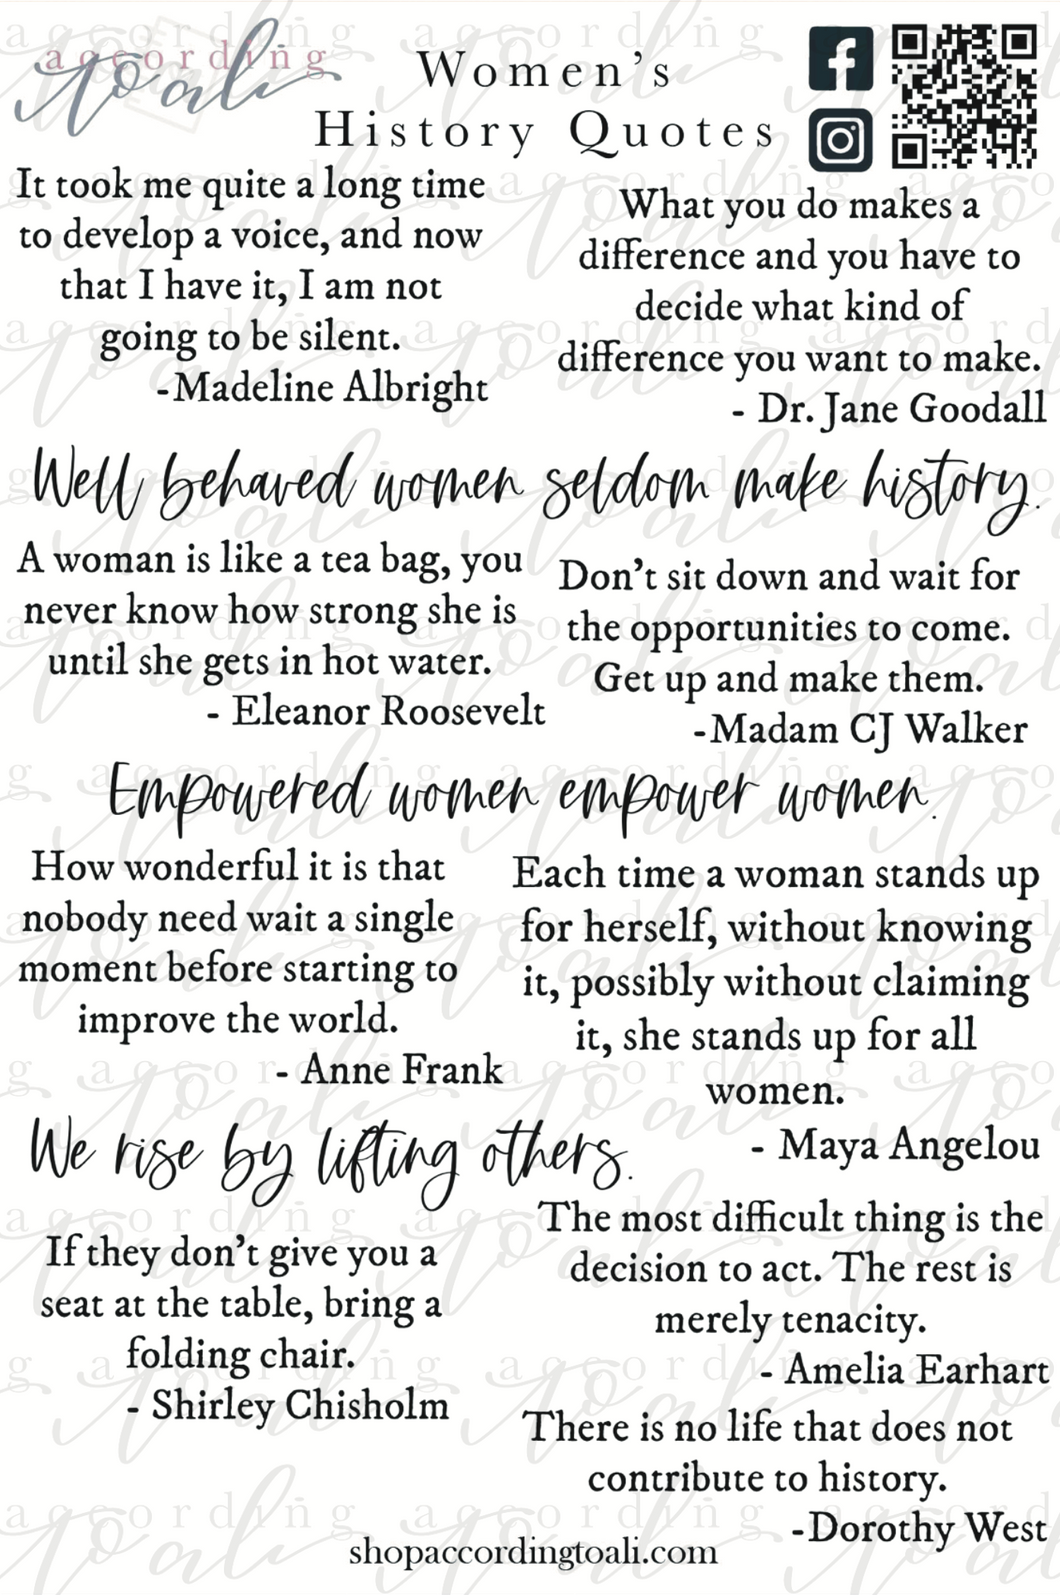 Women’s History Quotes Sticker Sheet